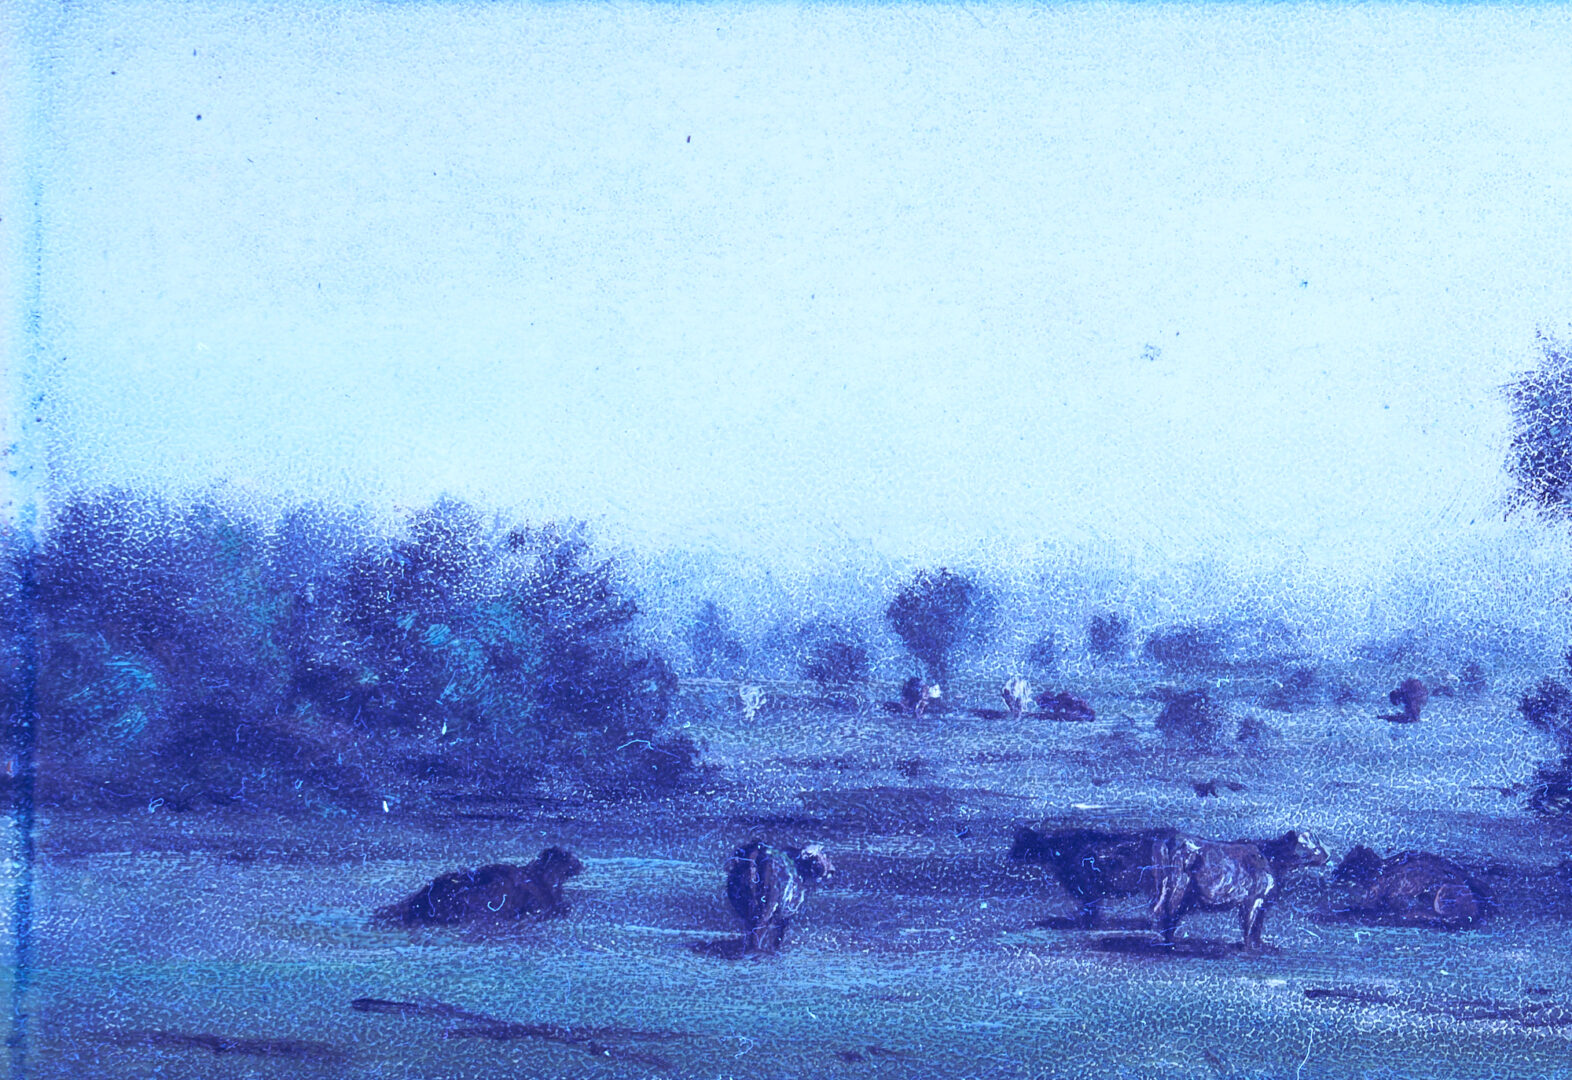 Lot 143: Thomas Campbell O/B Tennessee Landscape with Cows